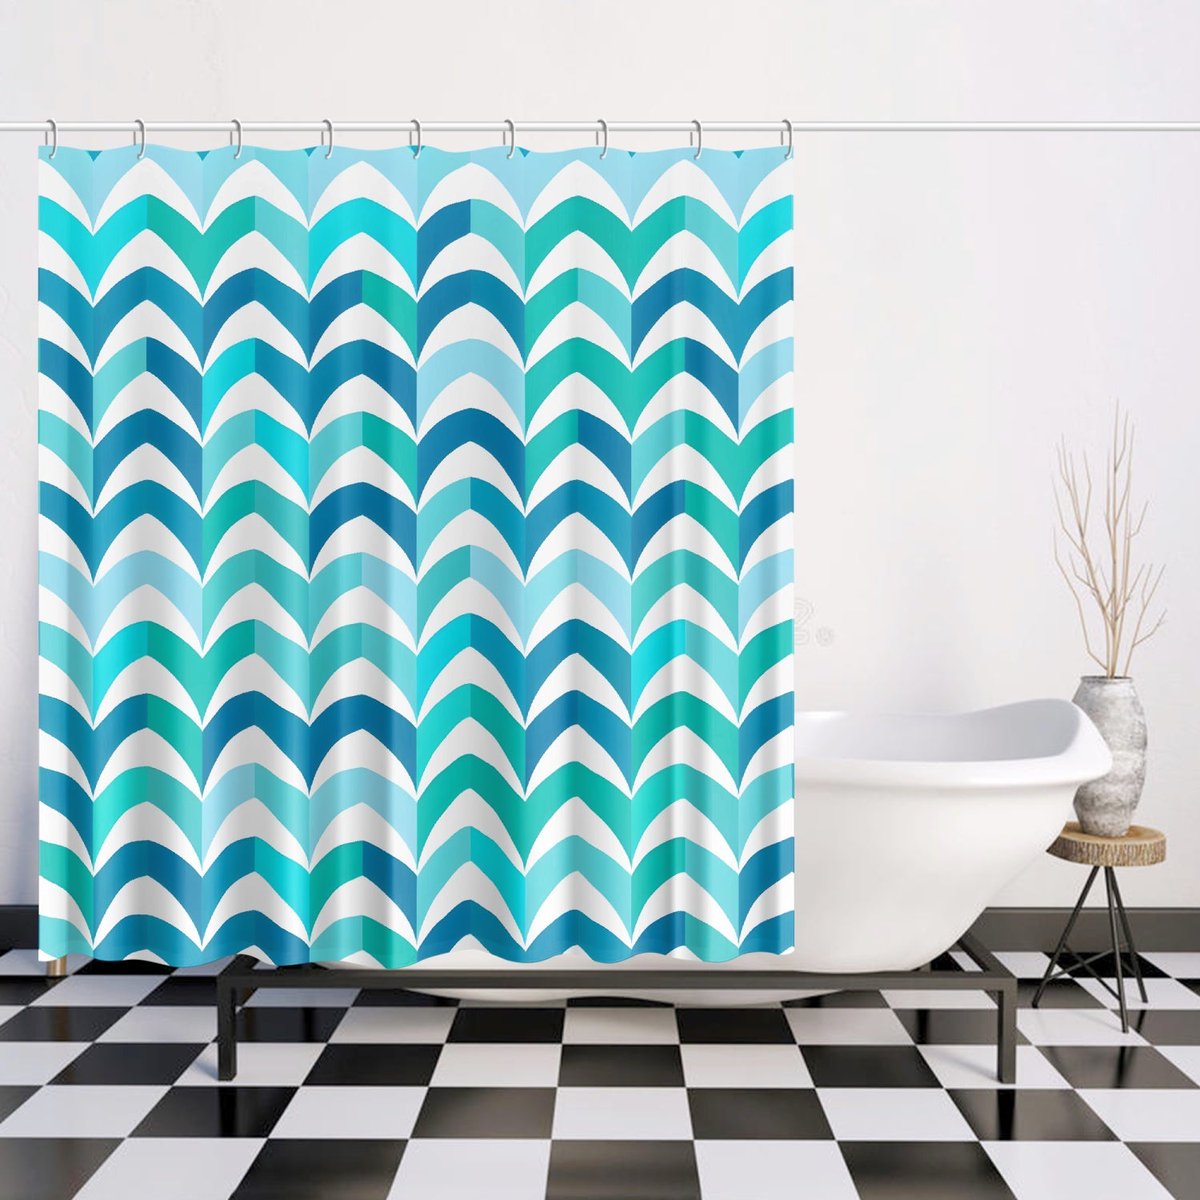 Pattern play is just a click away with Aquamarine Beach Shower Curtain 🎲🚿 Visit our bio for the link!#BathroomDecor #BathroomMakeover #ShowerCurtains #BathTime #BathroomStyle #BathroomDetails #LuxuryBathroom #BathroomInspo #ShowerDecor #WaterproofDecor
 showercurtainco.com/products/aquam…